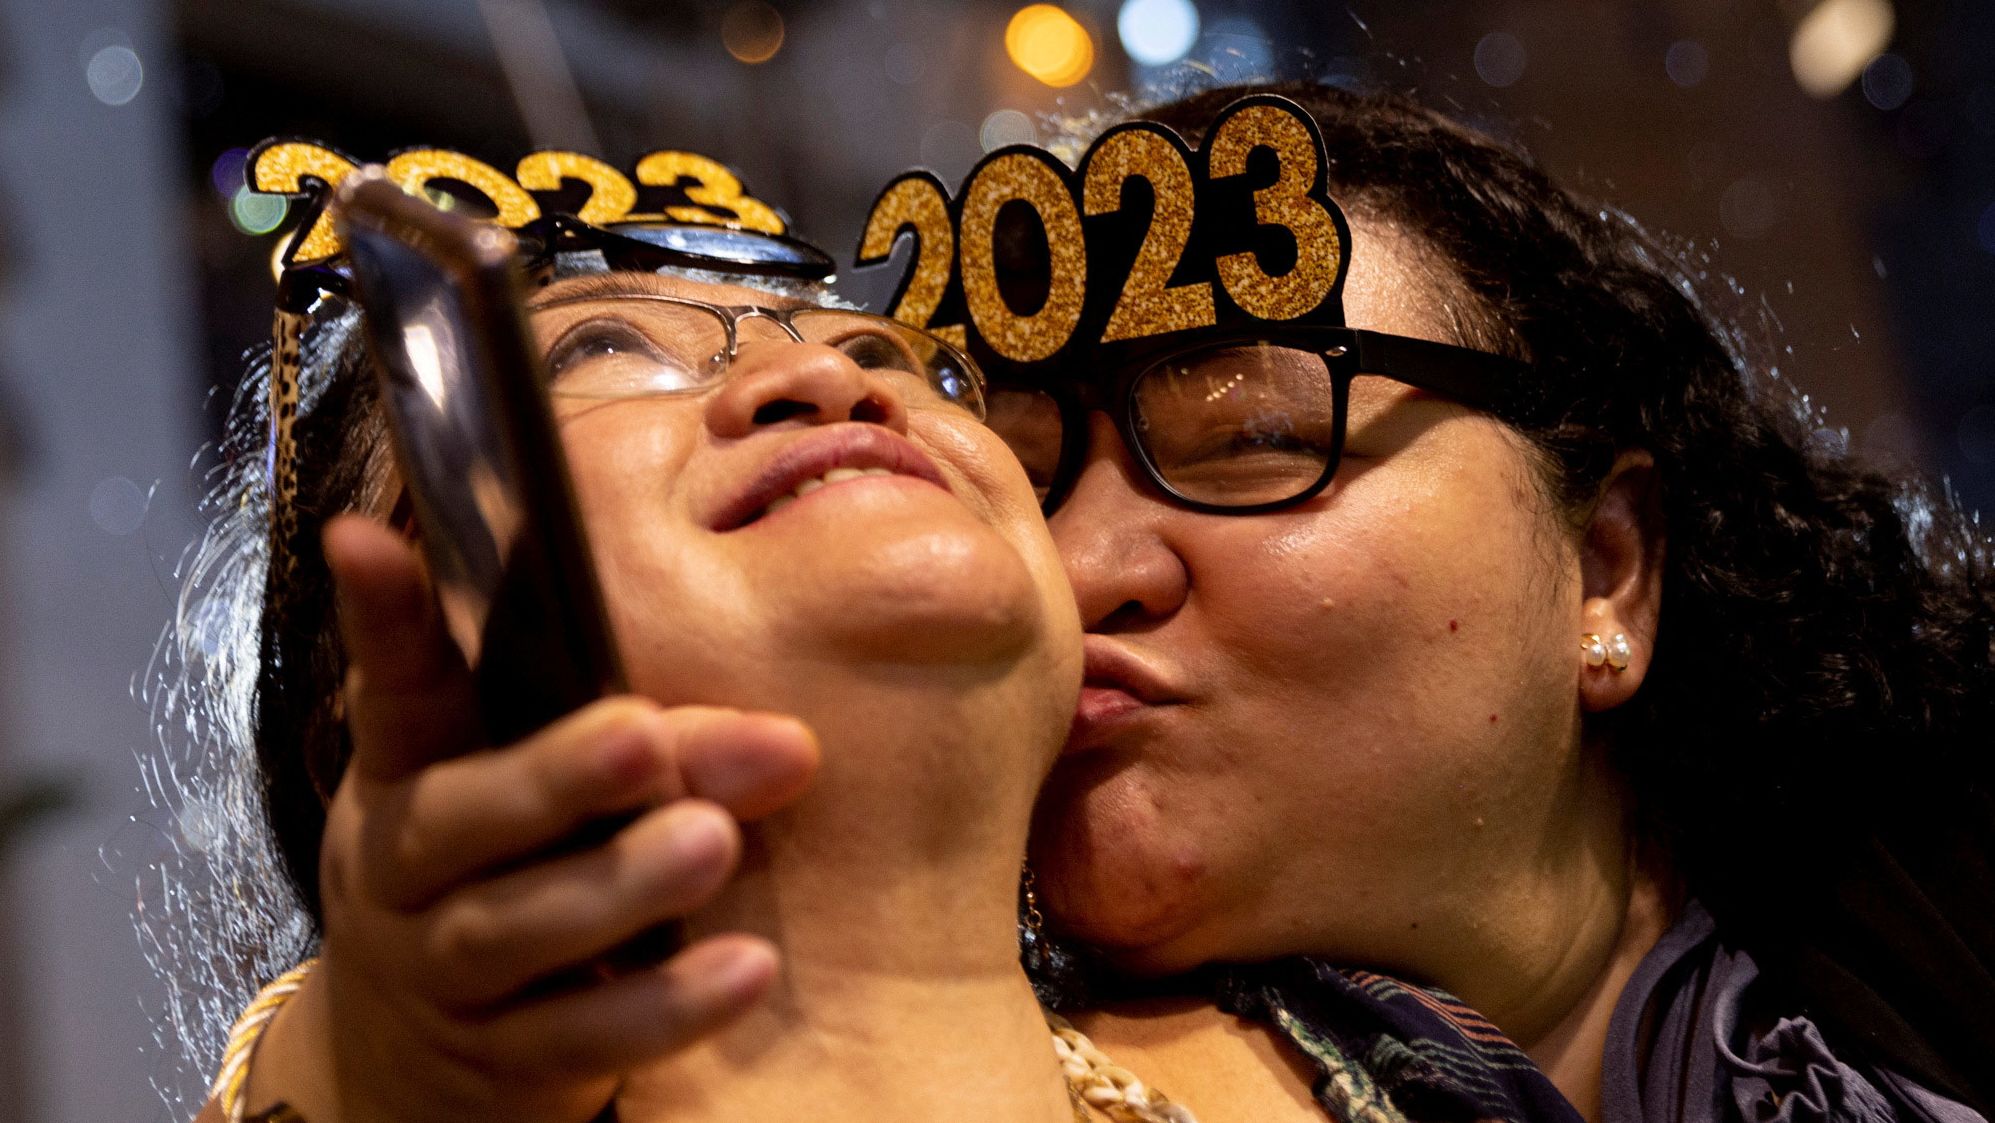 A woman kisses her mother during a New Year's Eve party in Quezon City, Philippines.